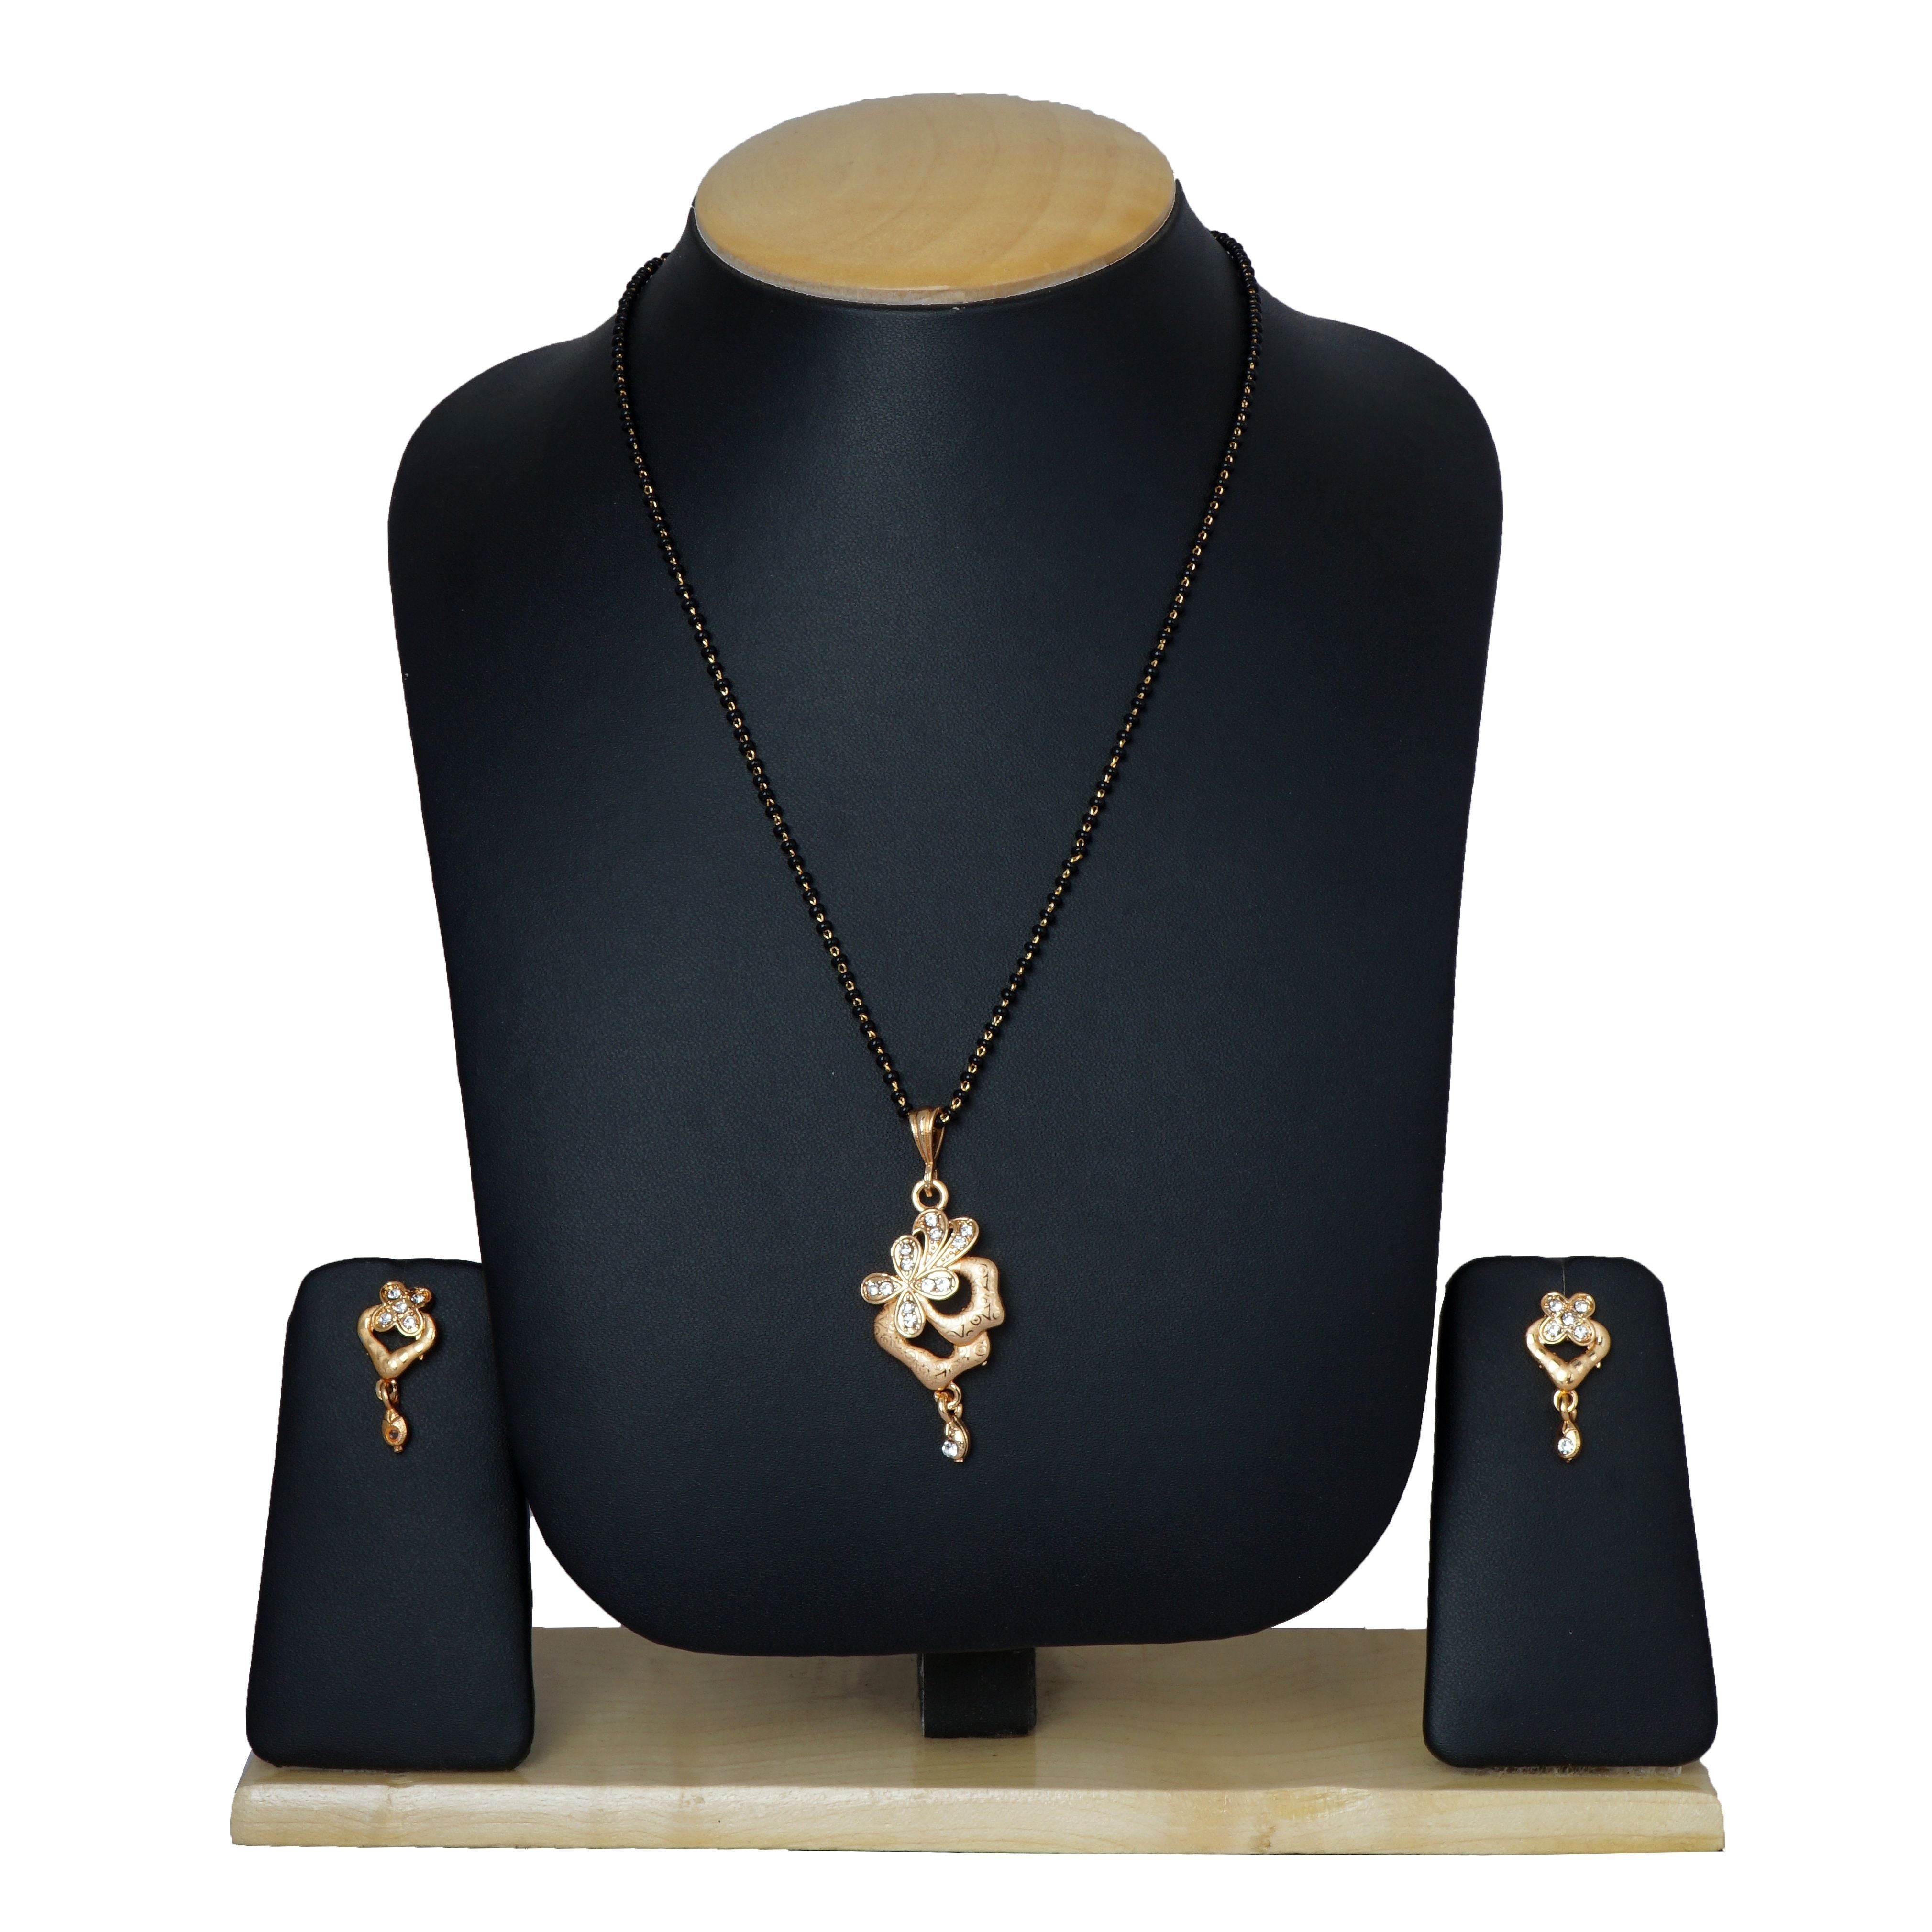 Indian Jewellery from Meira Jewellery:Mangalsutra,Rose gold plated fancy Mangalsutra with black beads